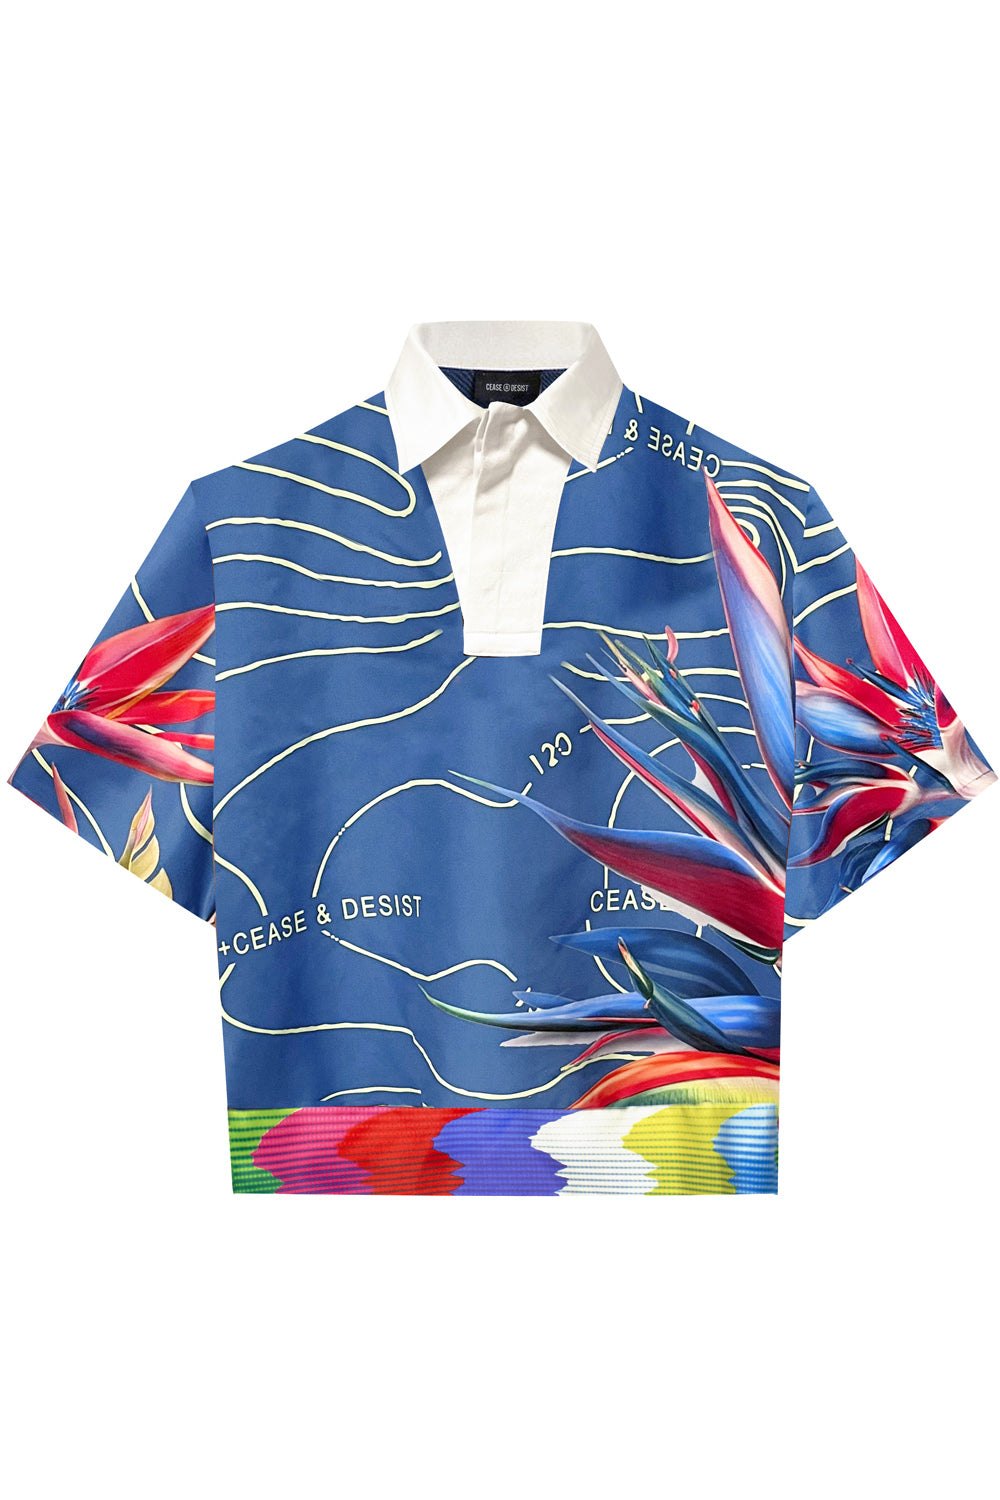 PARADISE RUGBY SHIRT (BLUE)